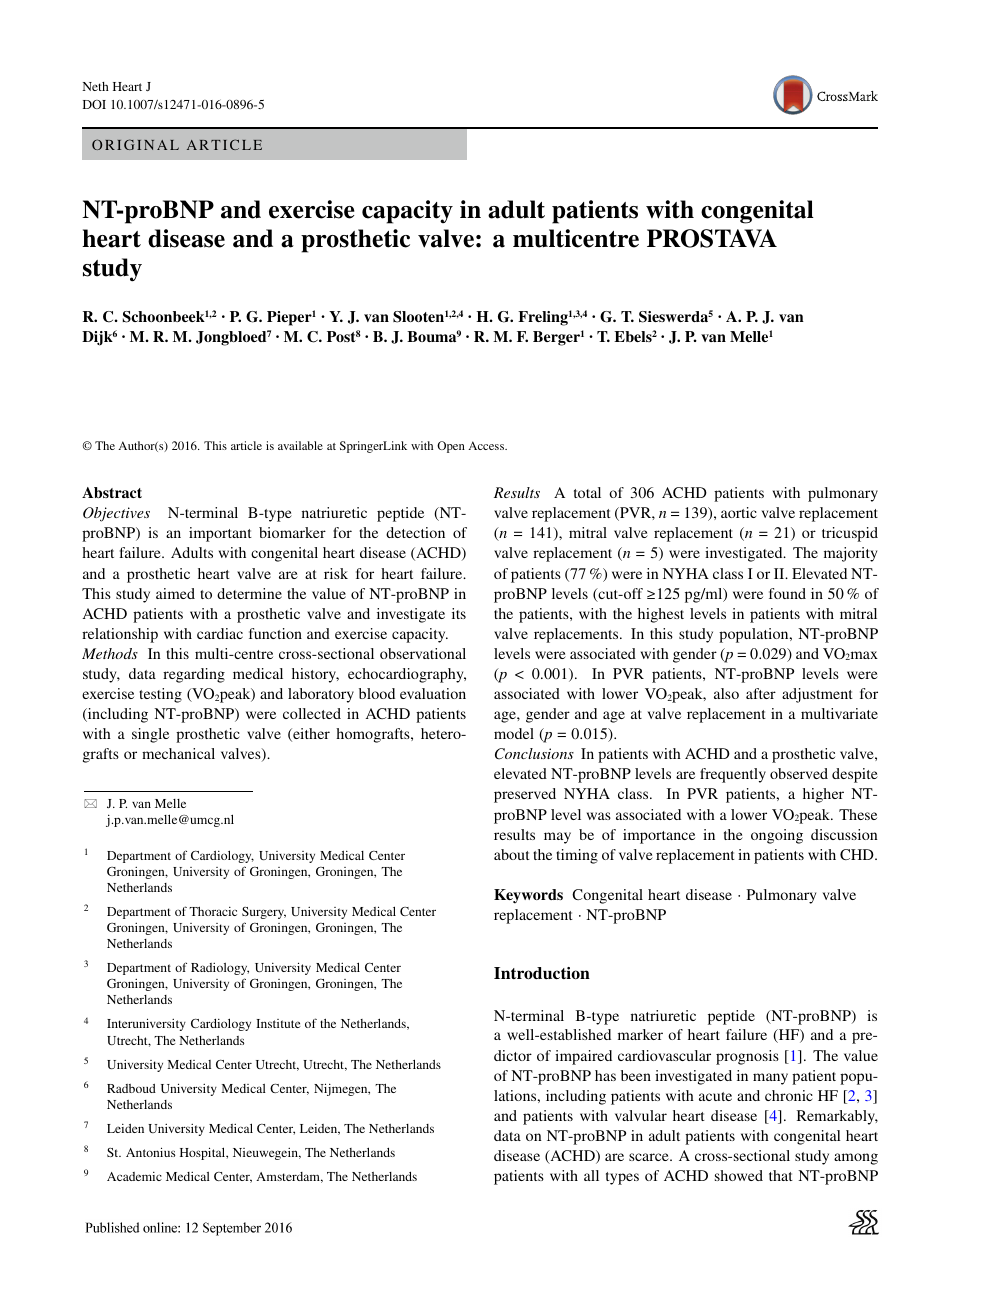 Nt Probnp And Exercise Capacity In Adult Patients With Congenital Heart Disease And A Prosthetic Valve A Multicentre Prostava Study Topic Of Research Paper In Clinical Medicine Download Scholarly Article Pdf And